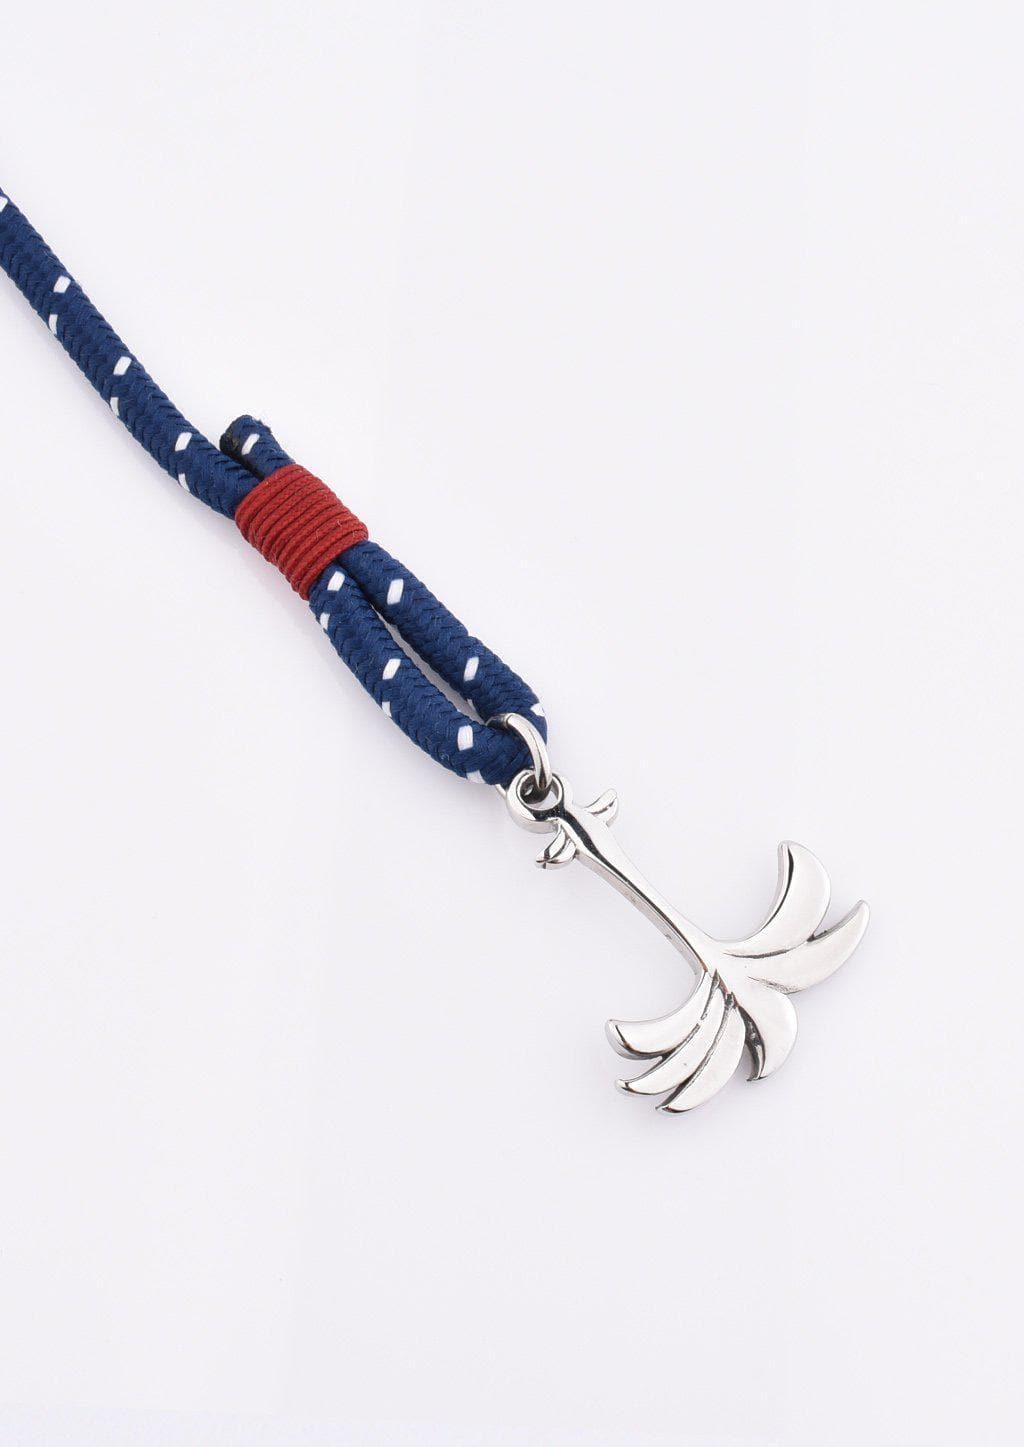 Voyager - Triple - Season two Palm anchor bracelet with blue and red nylon band. Close up on palm.